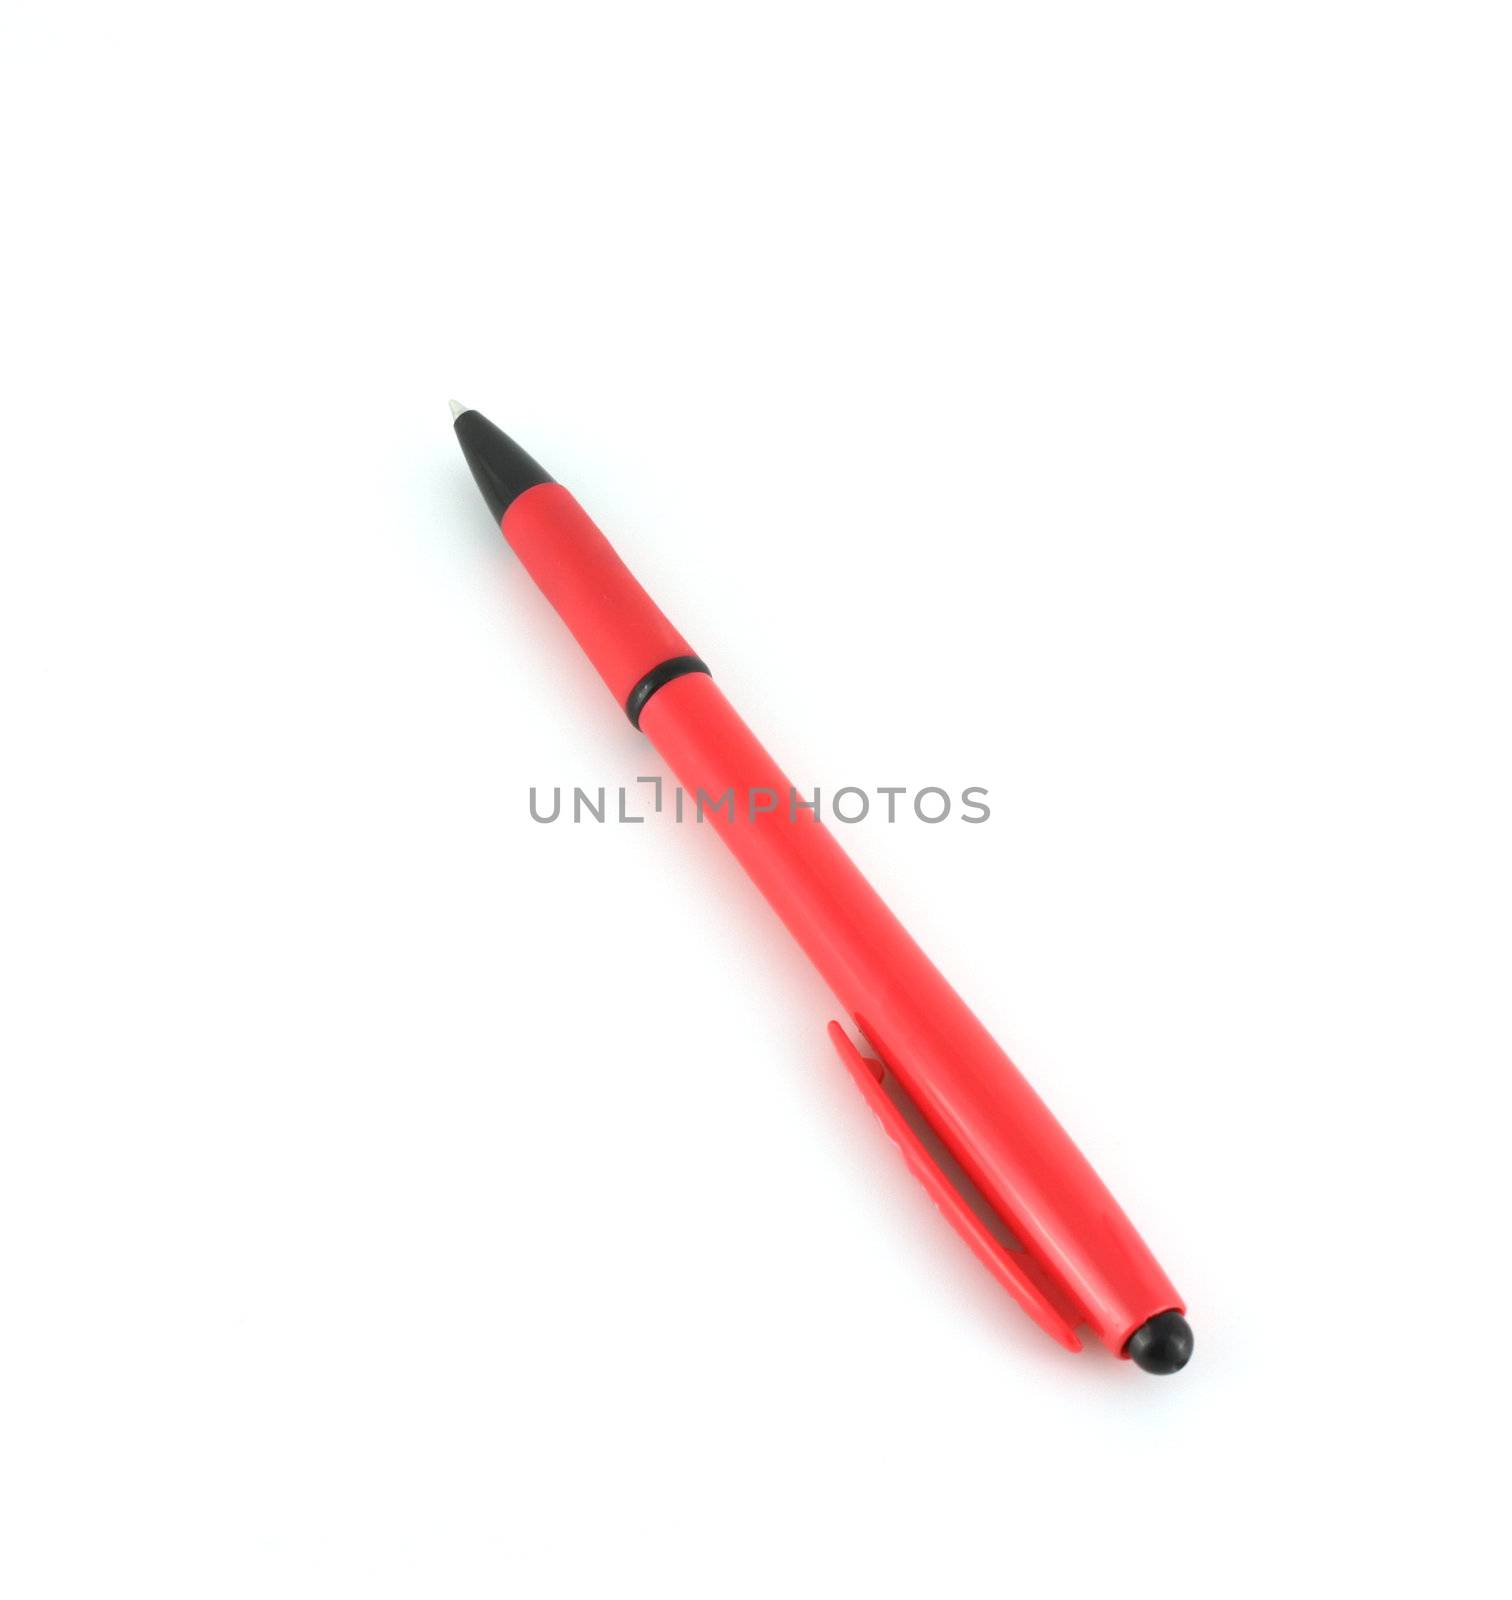 Red ball-point pen over white